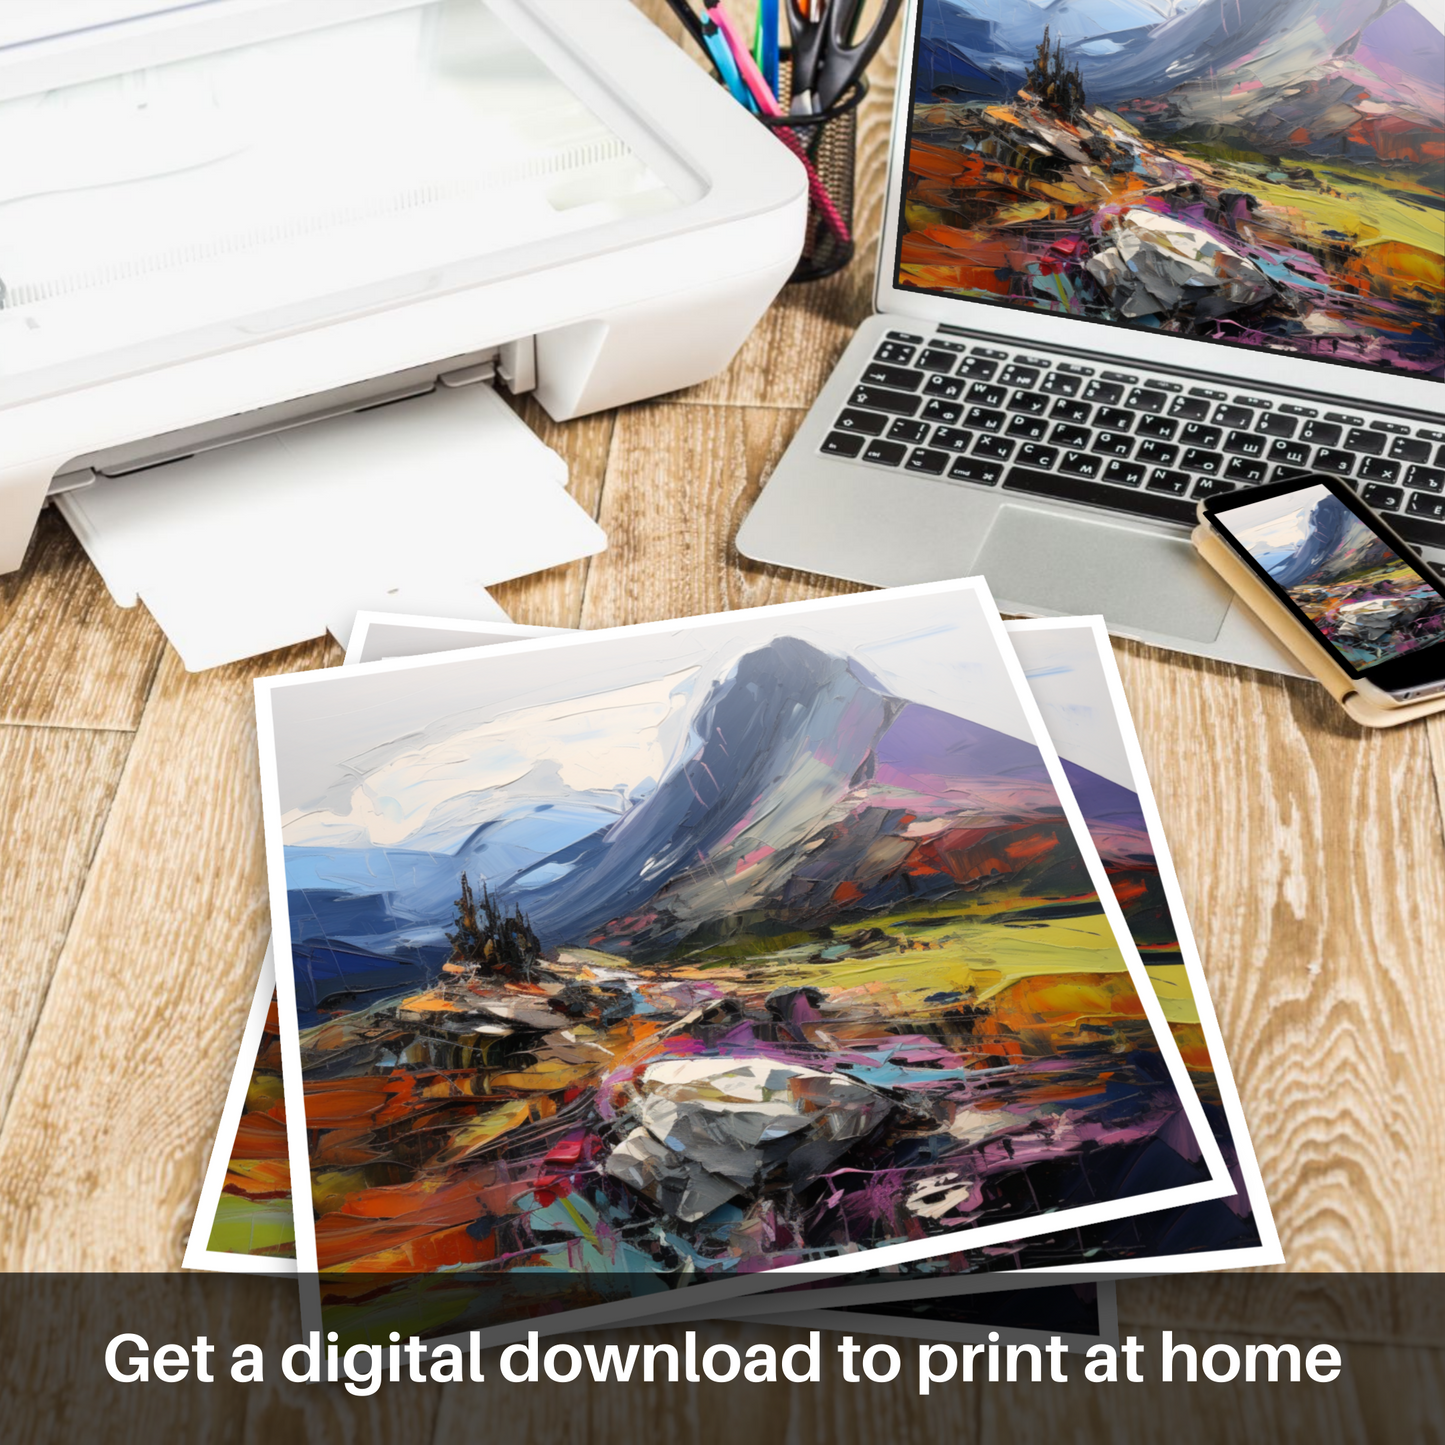 Downloadable and printable picture of Cairn Gorm, Highlands